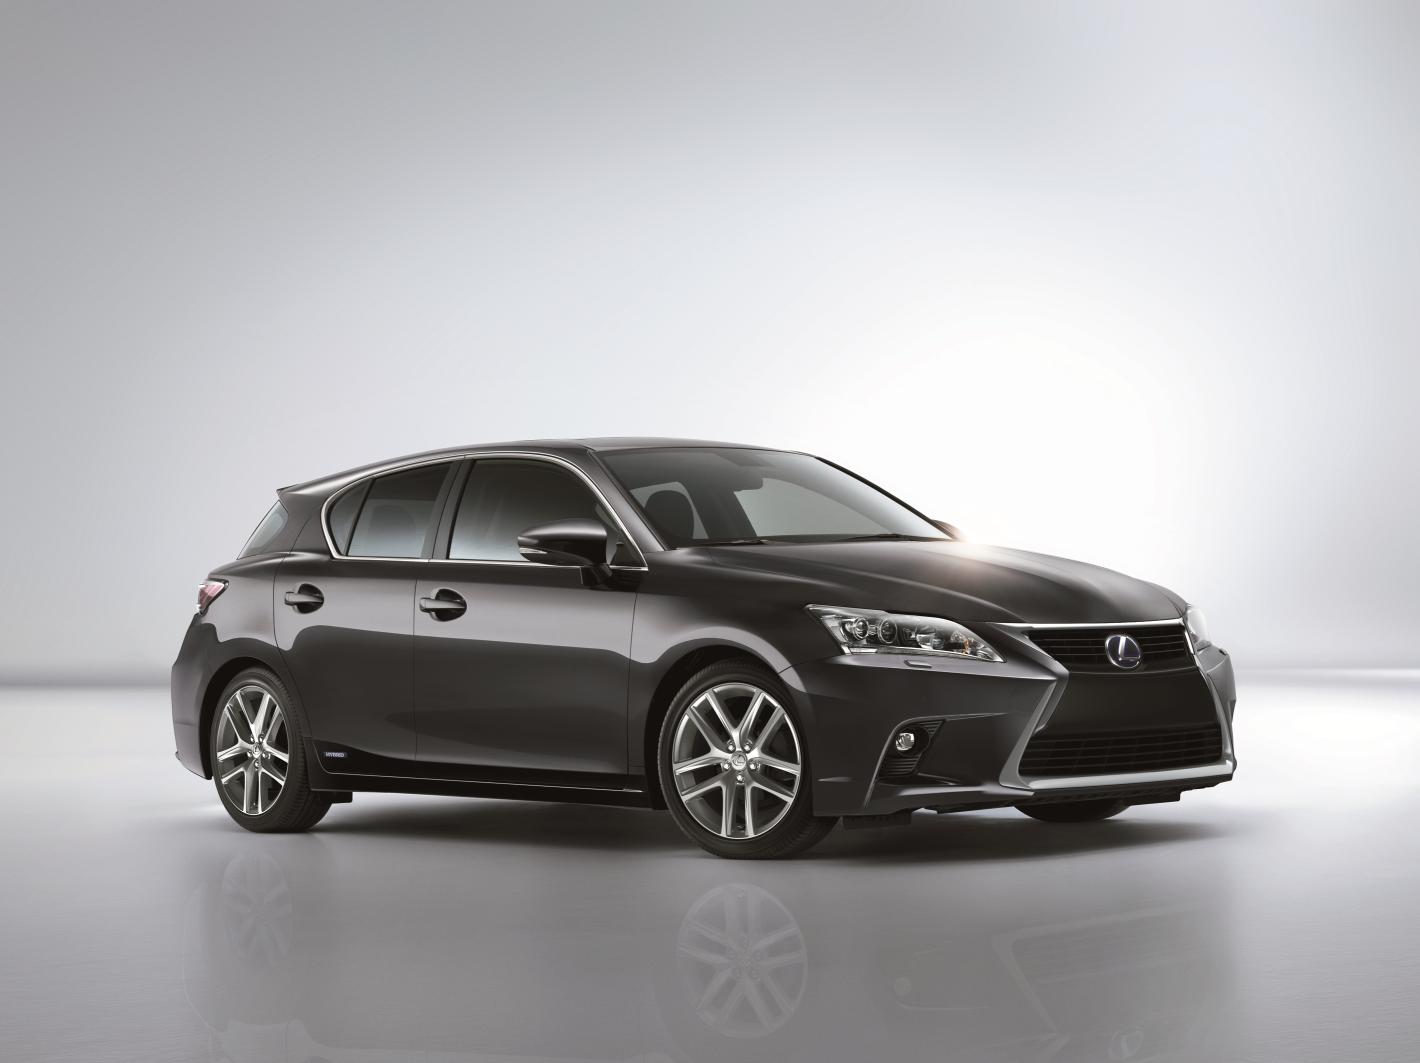 Lexus CT 200h More comfort and refinement for the Lexus CT 200h